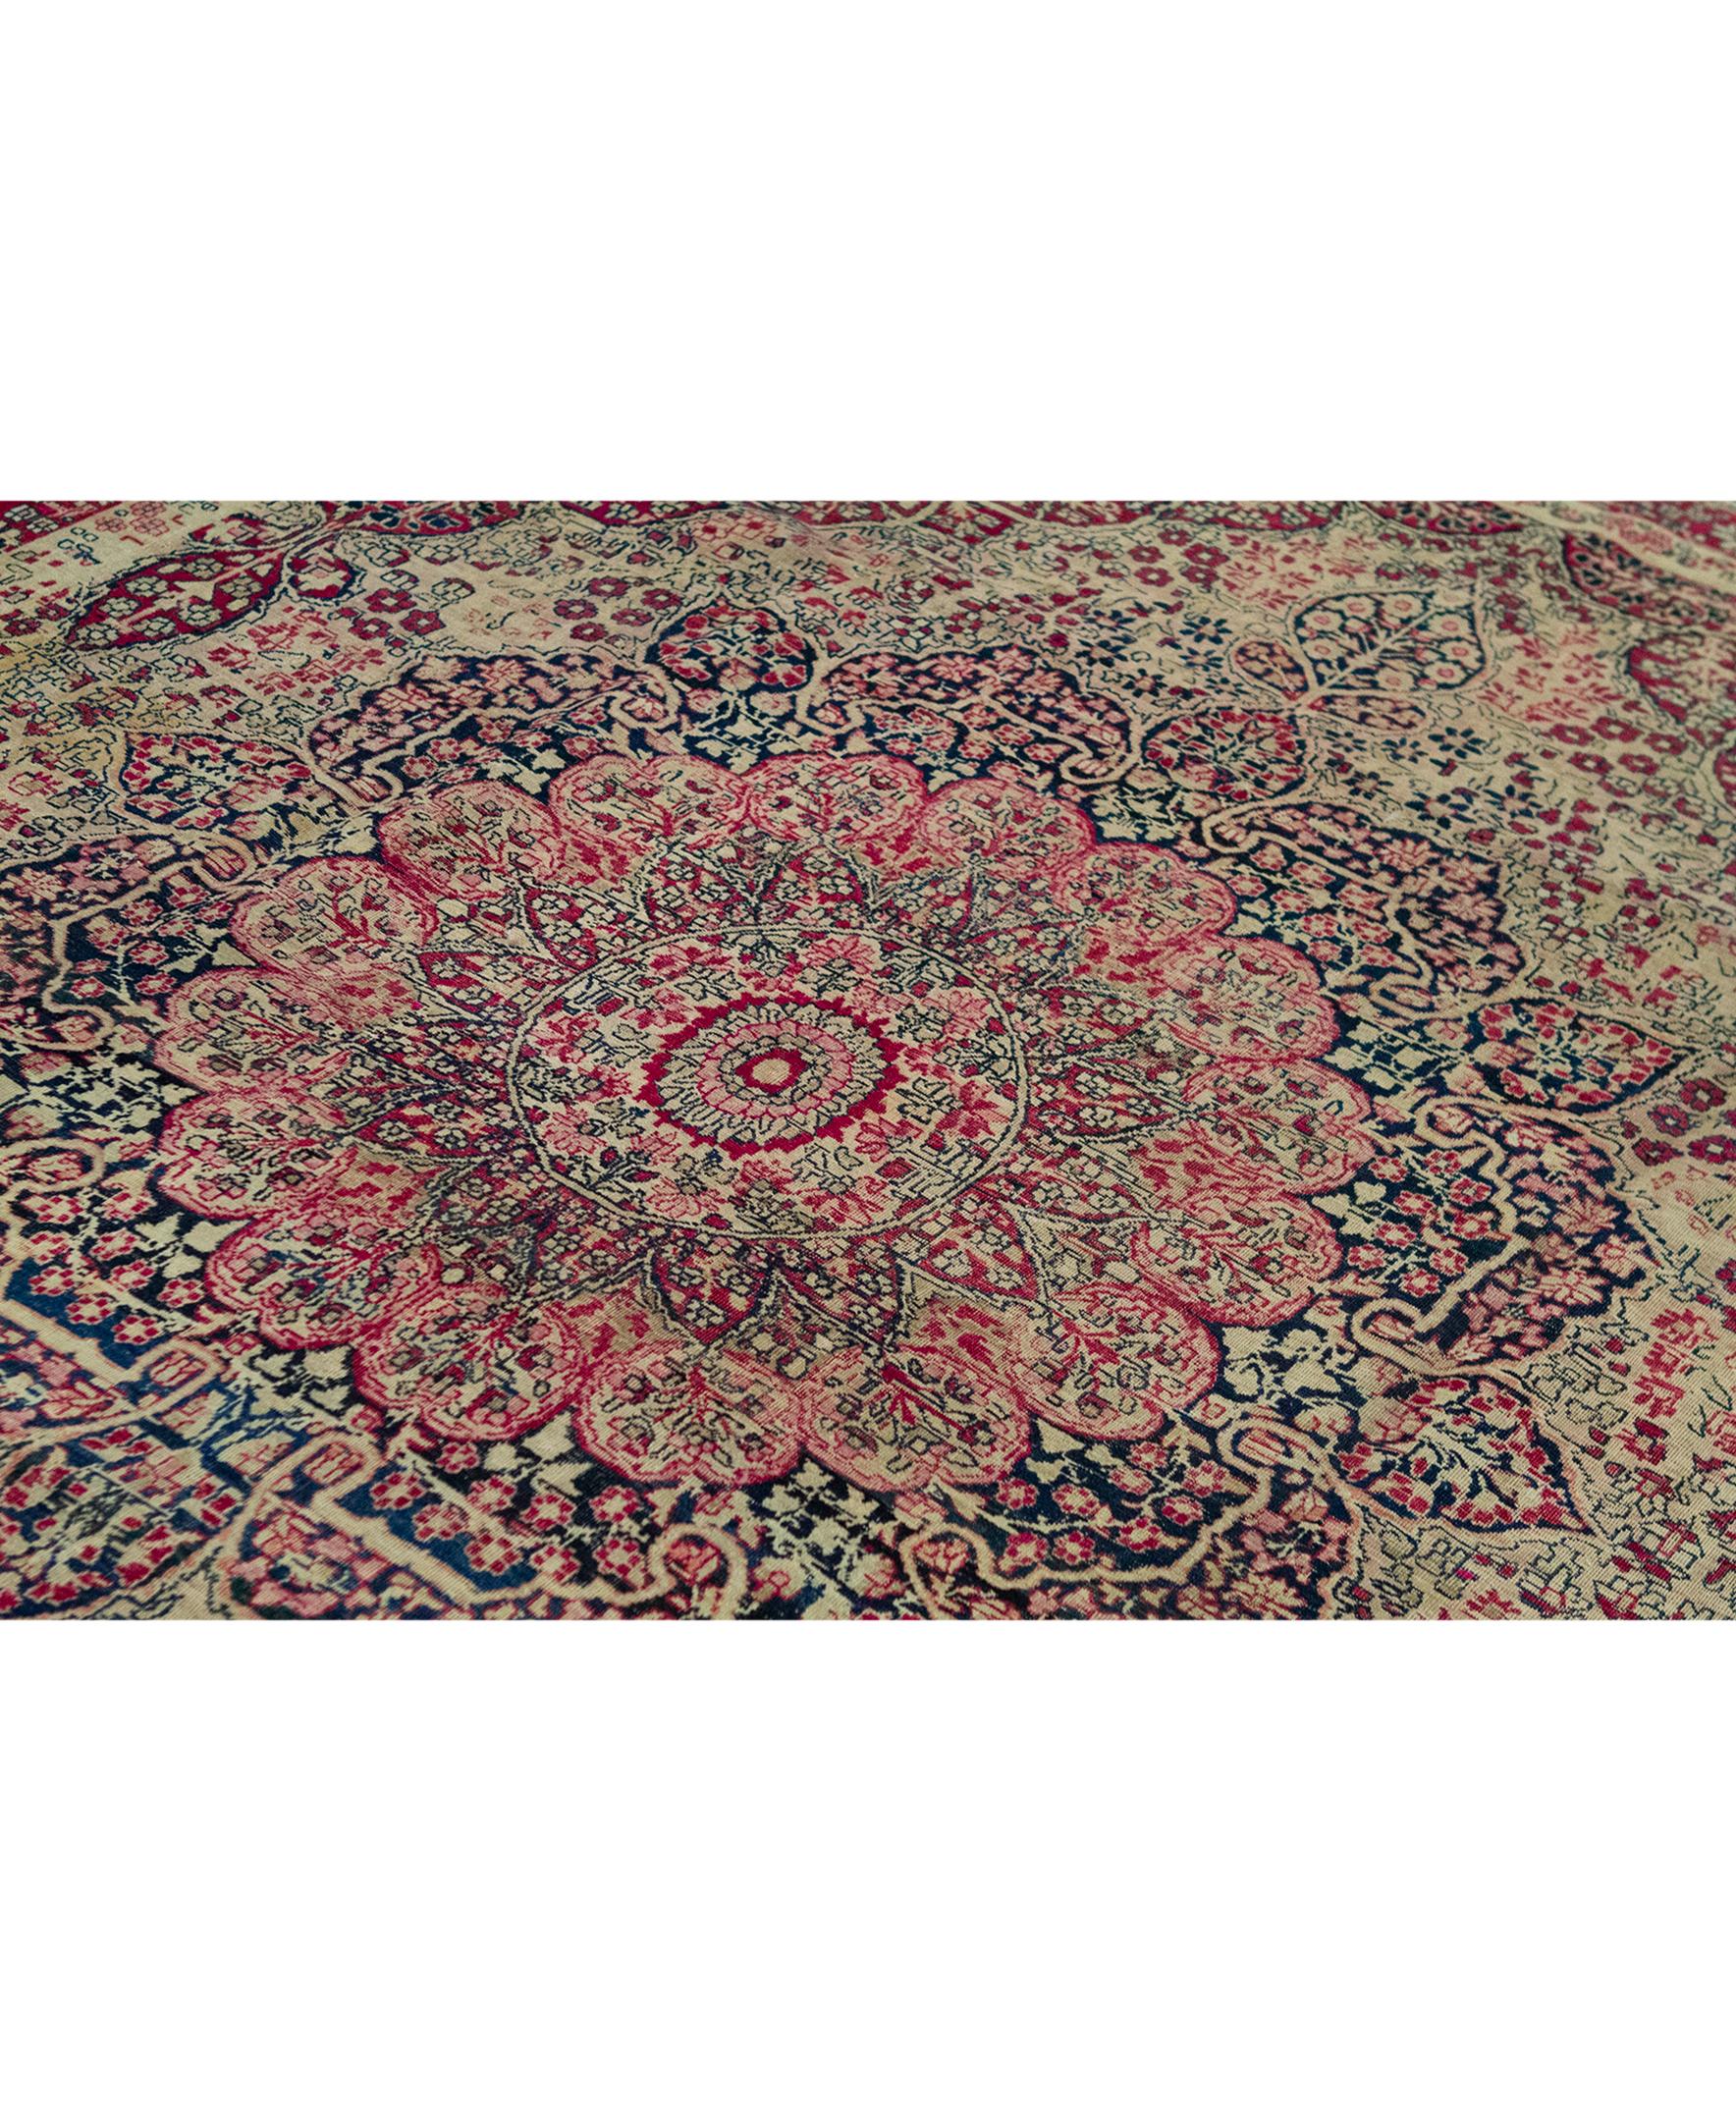   Antique Persian Fine Traditional Handwoven Luxury Wool Beige Rug. Size: 9'-5